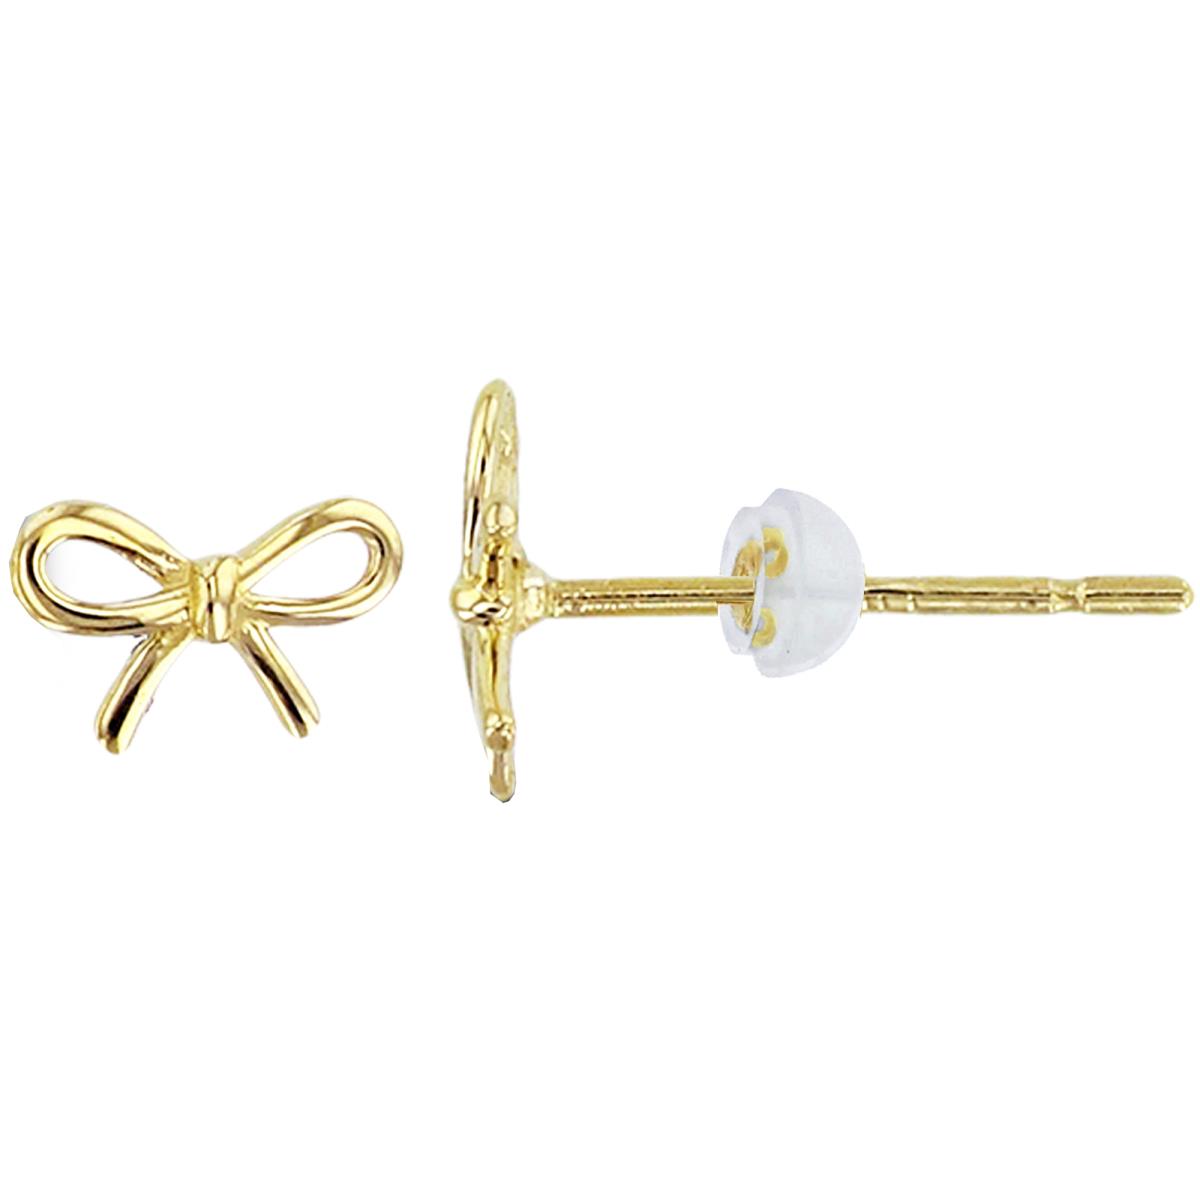 14K Yellow Gold High Polish Ribbon Bow Studs with Silicon Backs